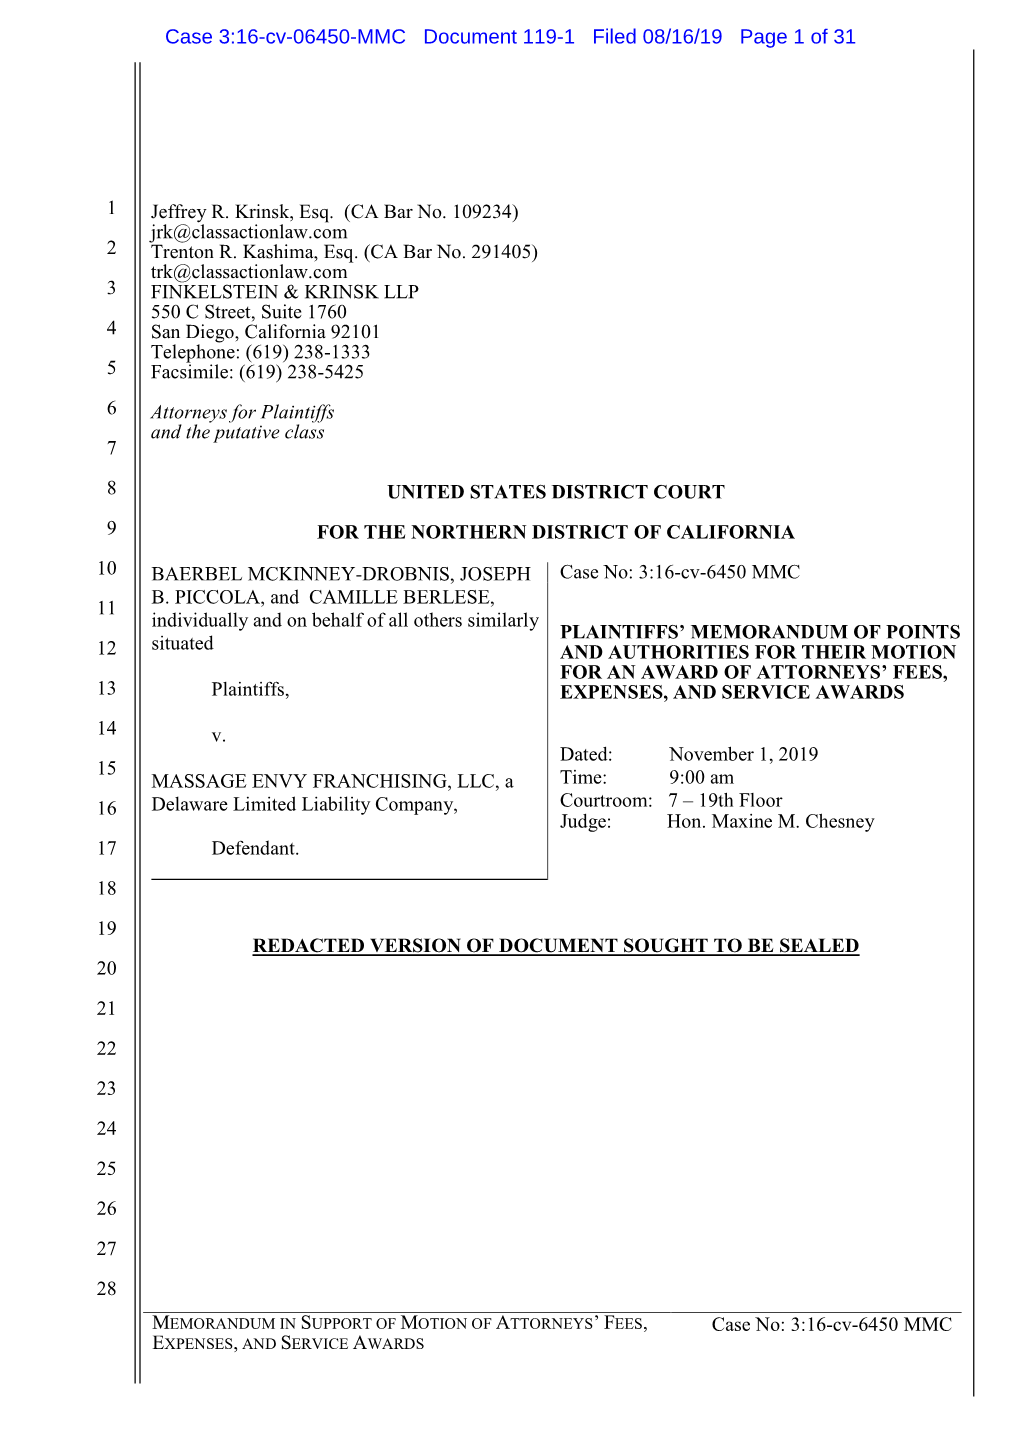 Case 3:16-Cv-06450-MMC Document 119-1 Filed 08/16/19 Page 1 of 31